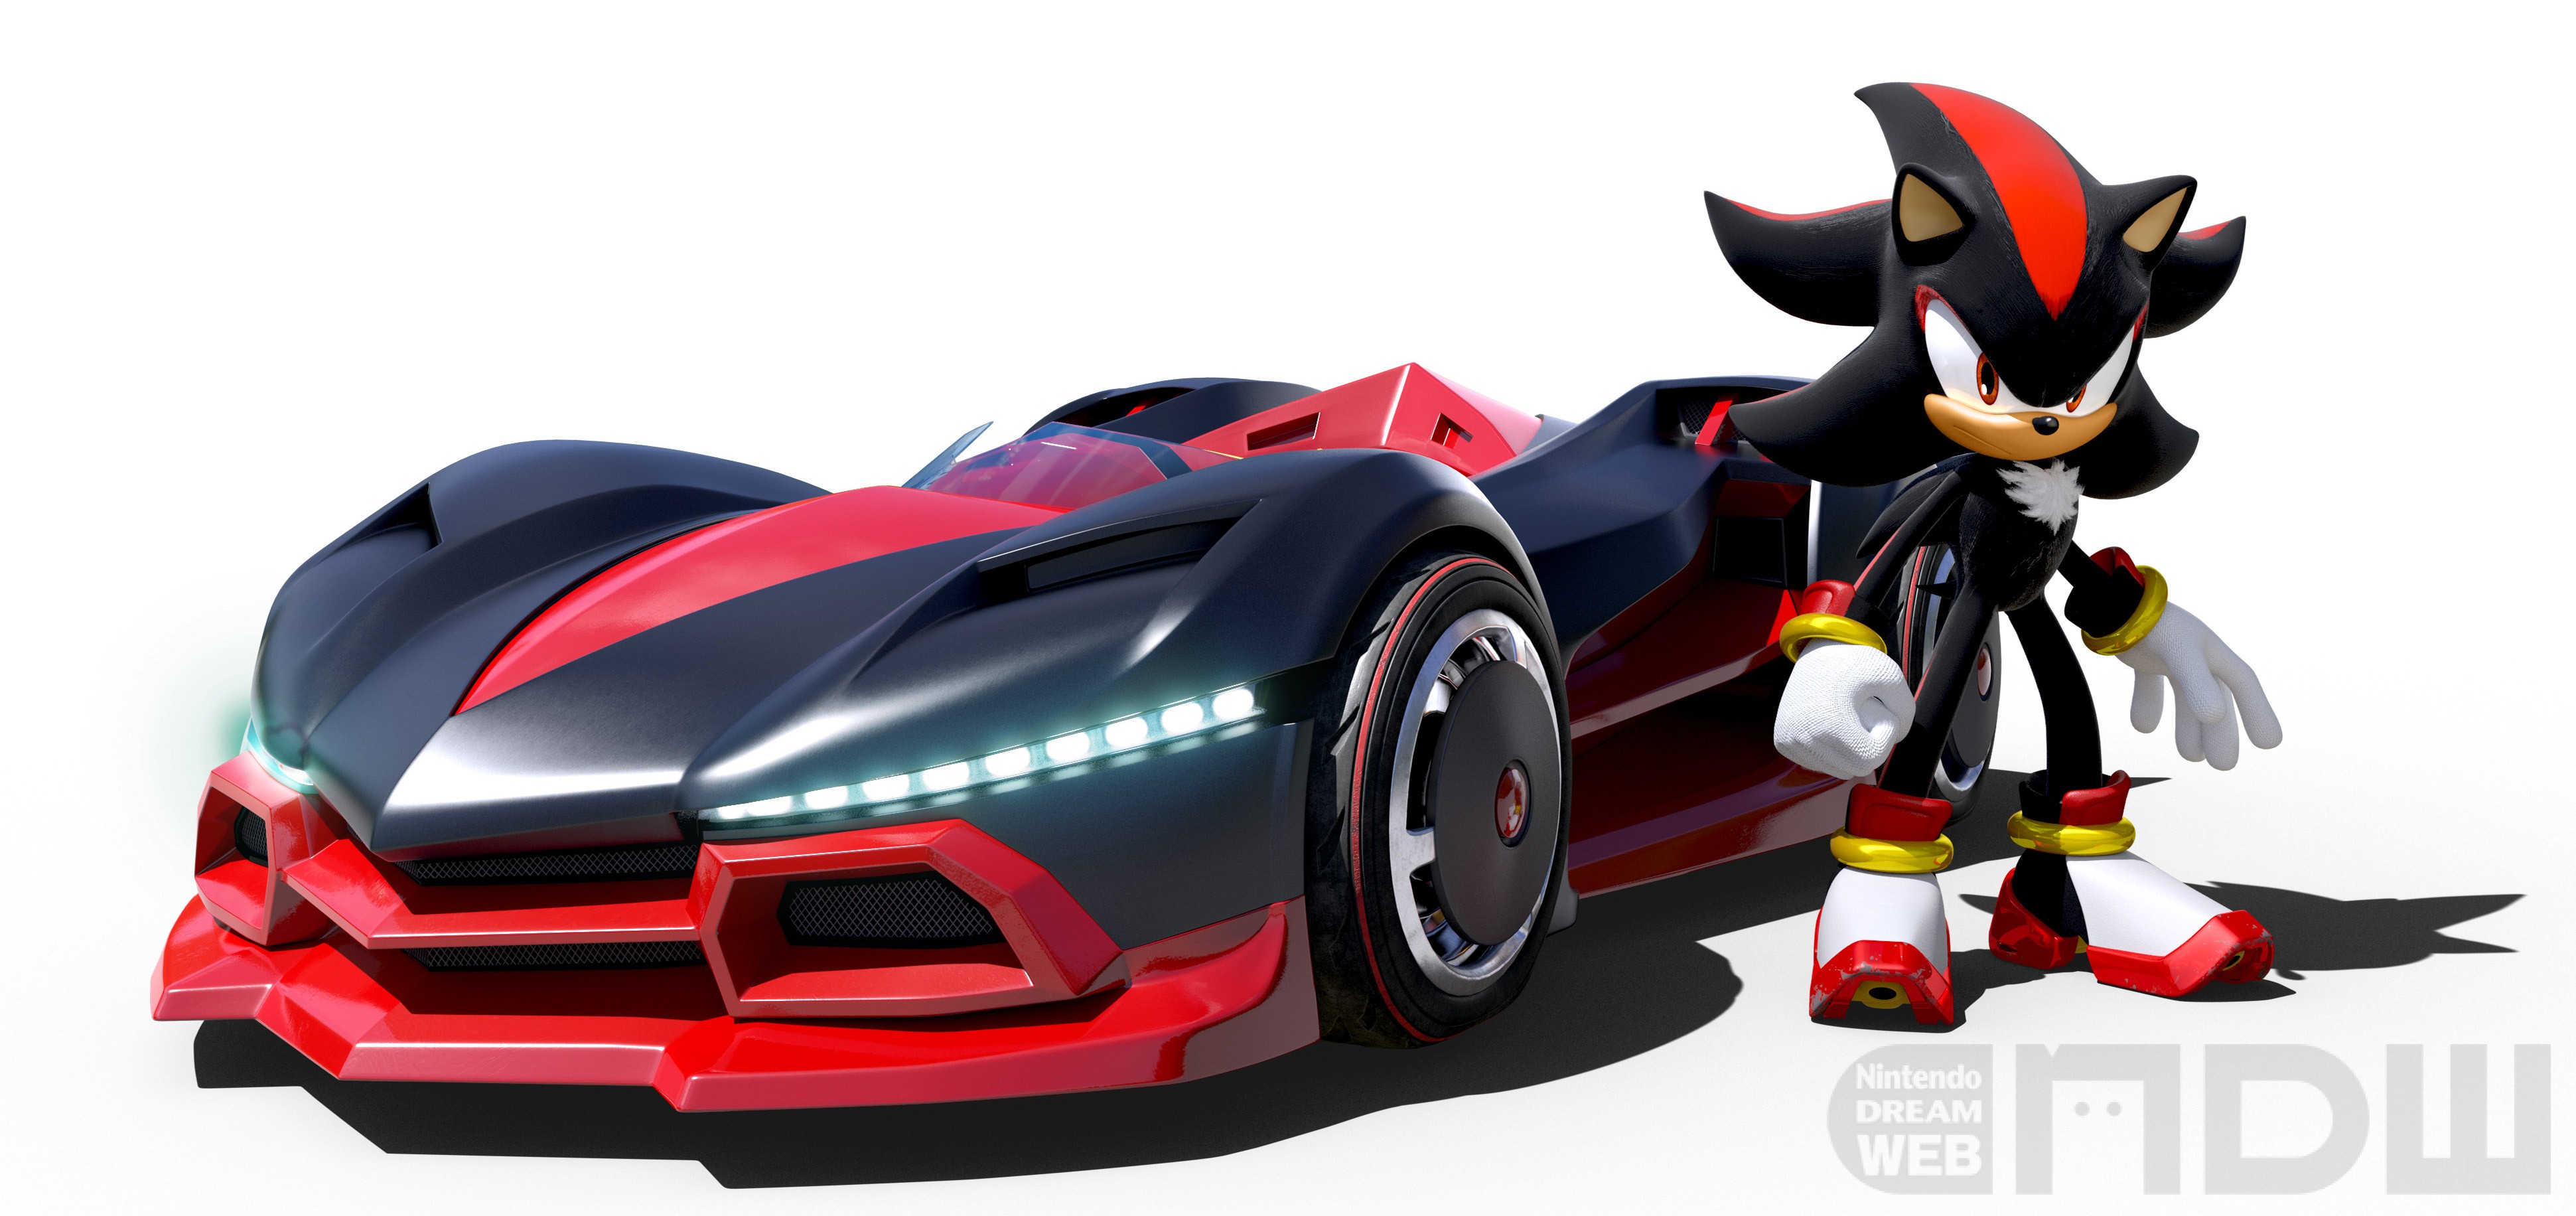 Special Project] Direct Interview with “Team Sonic Racing” Racers